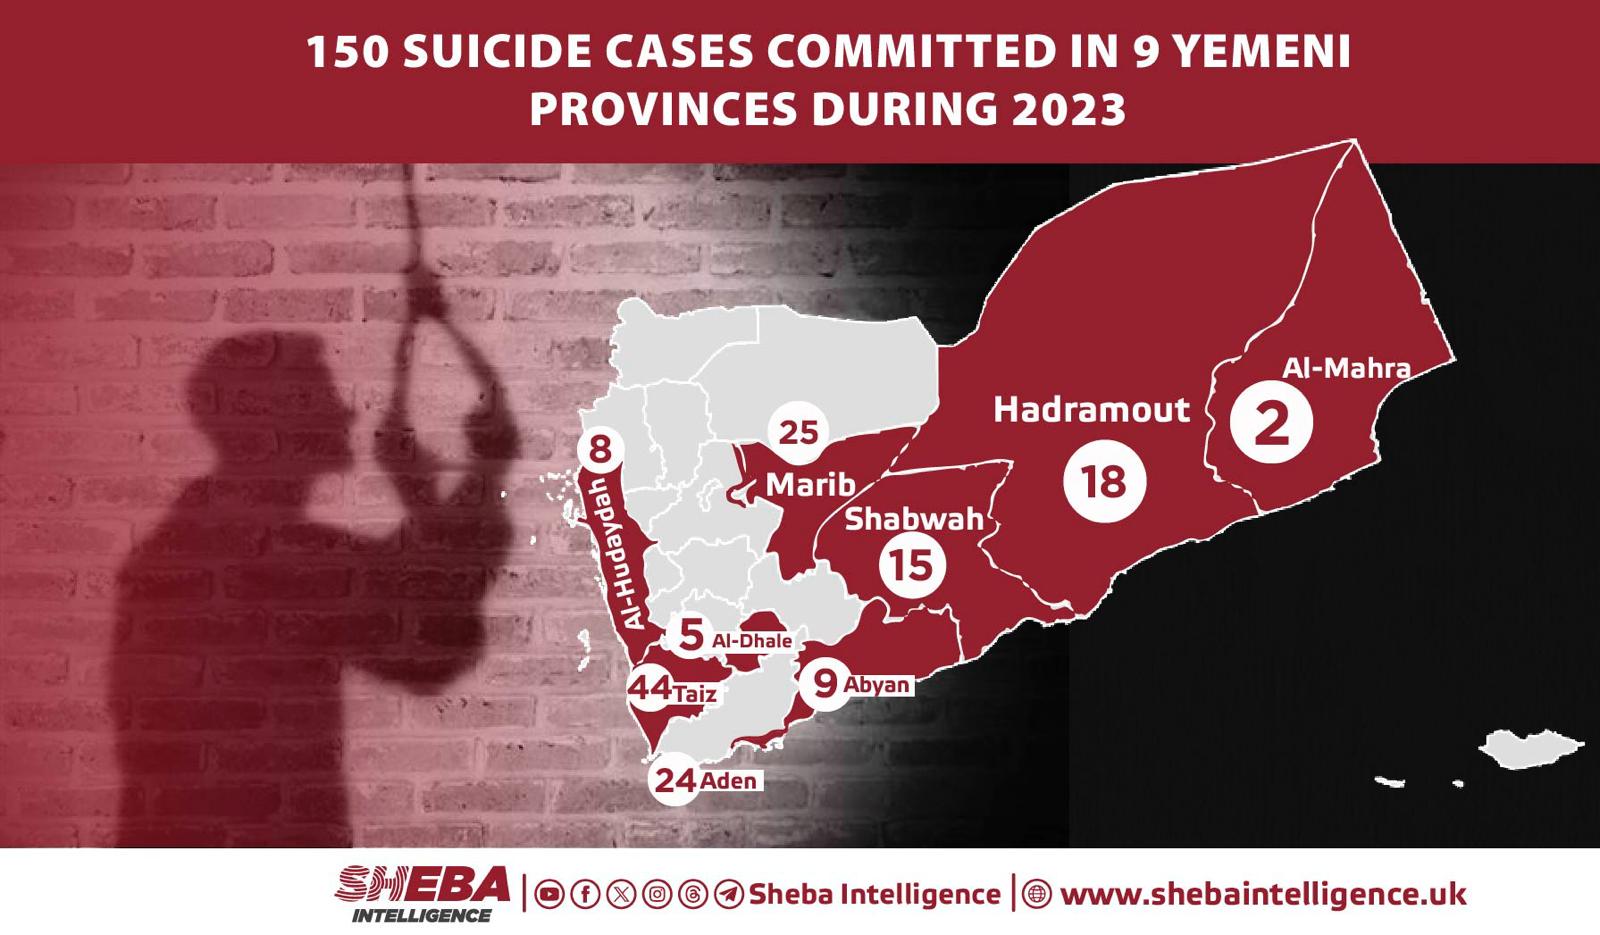 150 Suicide Cases Committed in 9 Yemeni Provinces During 2023